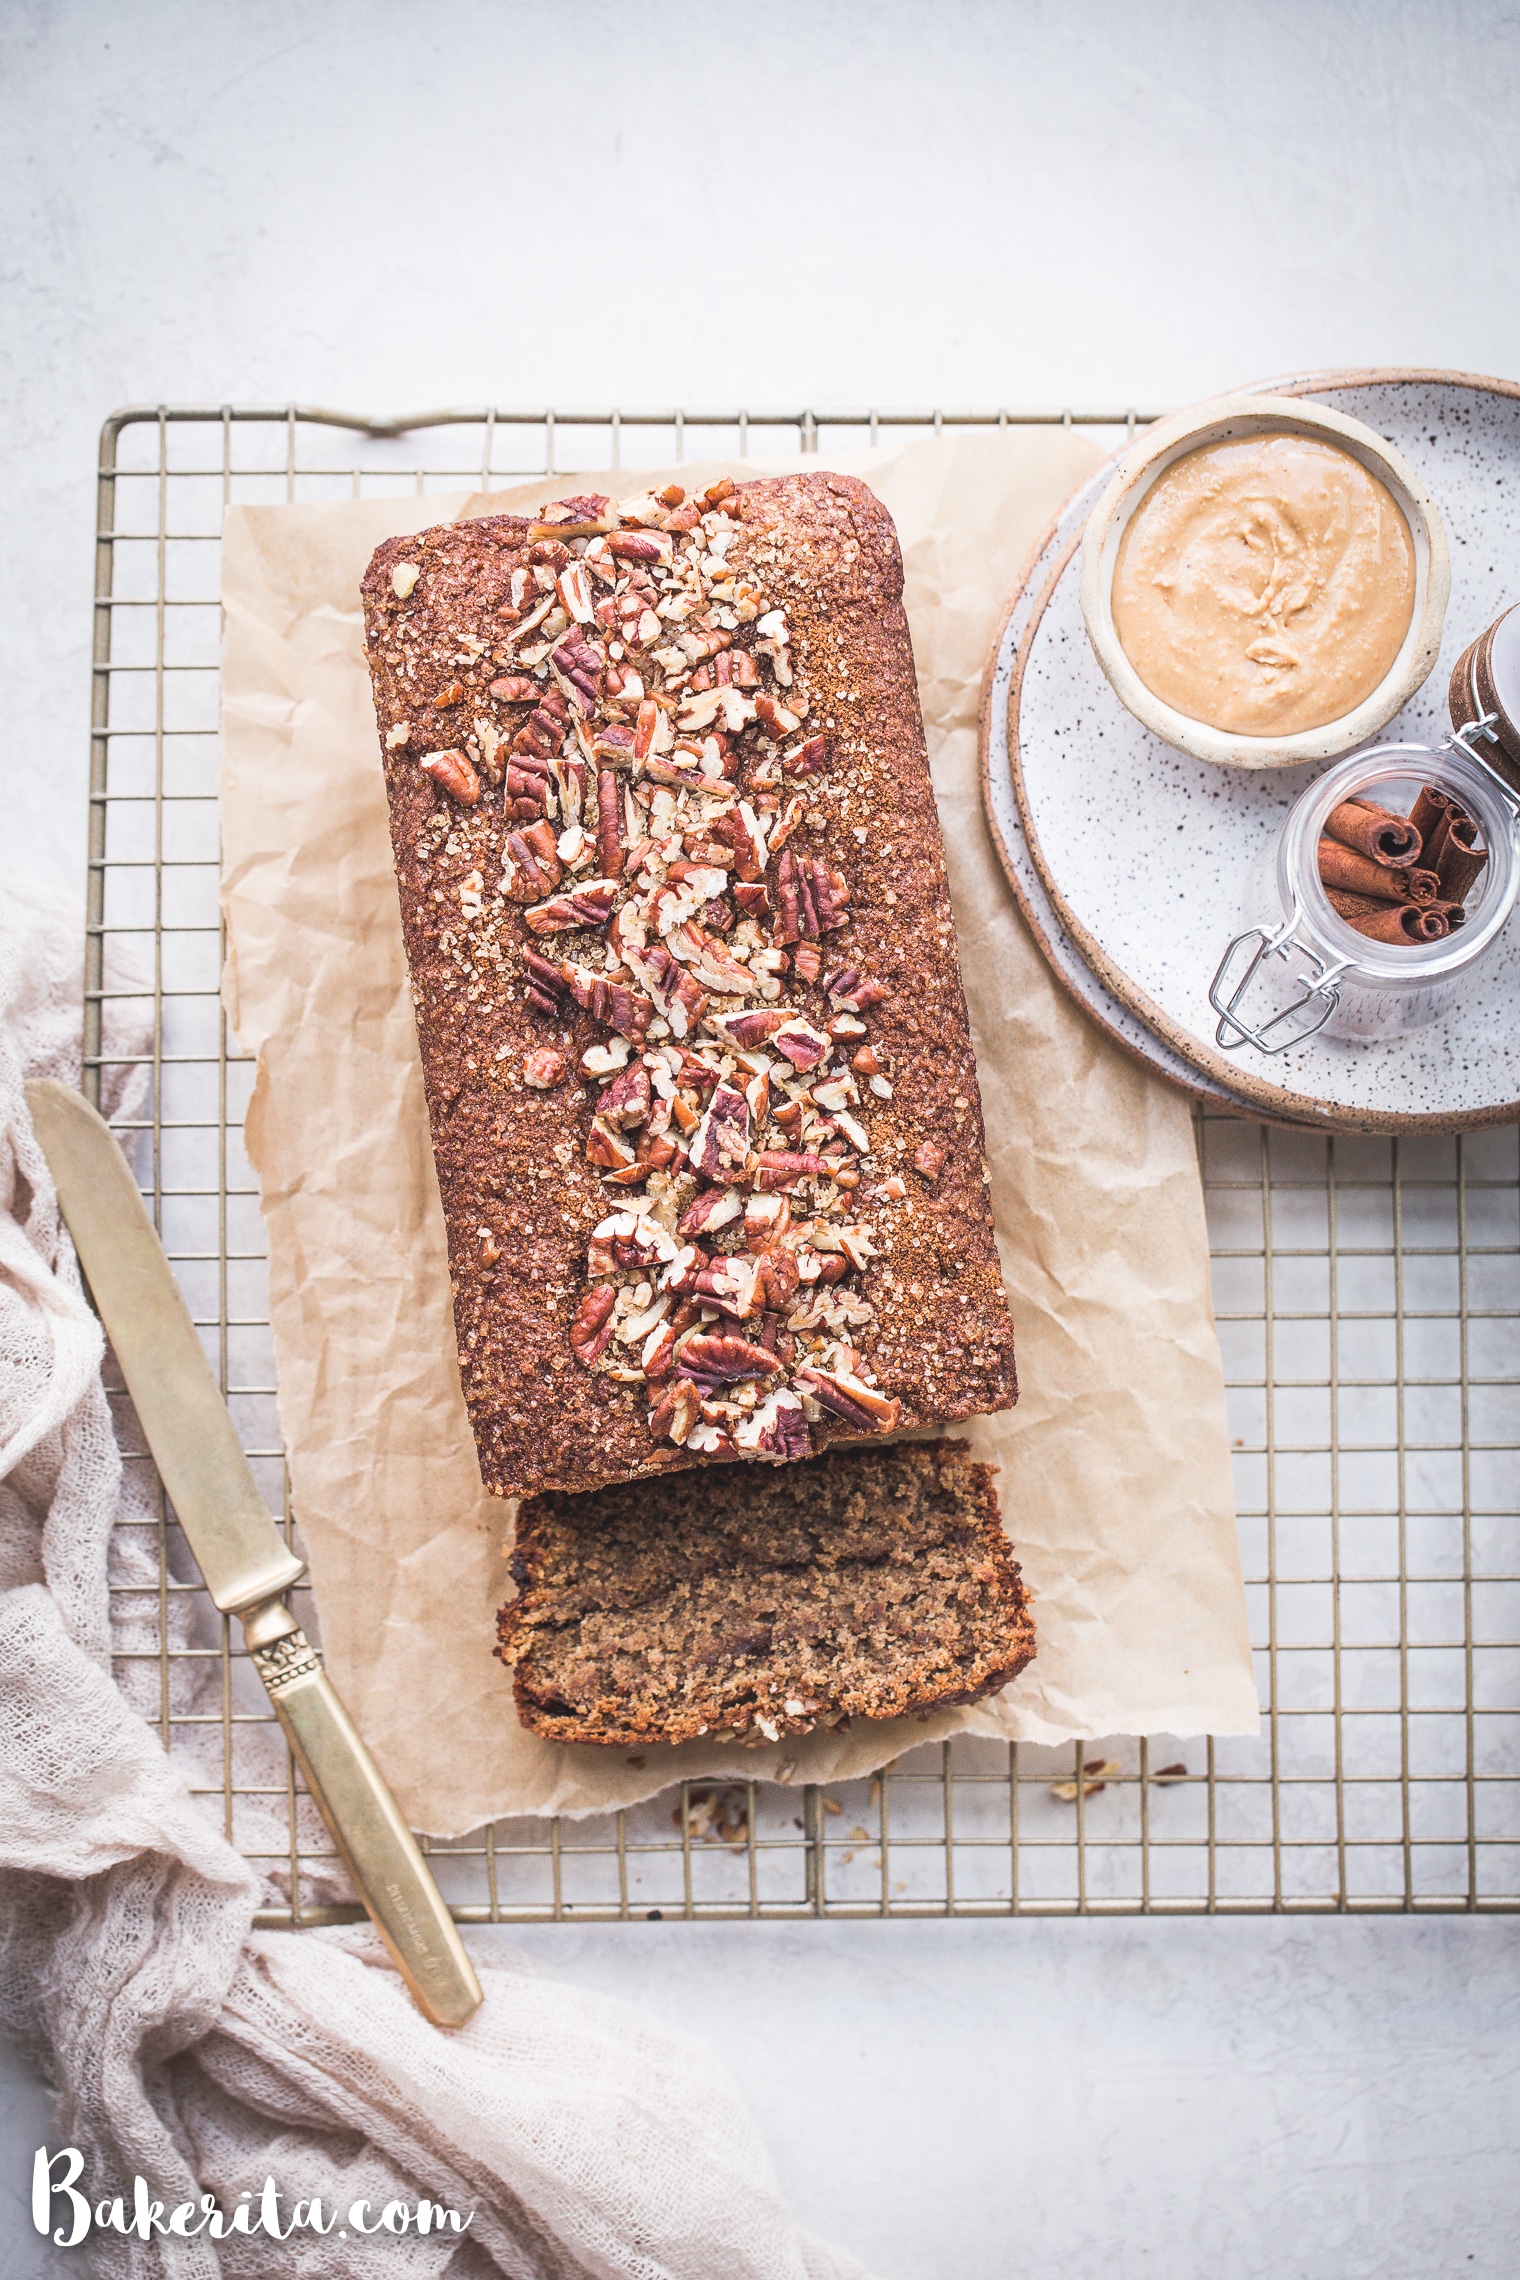 A slice of this gluten-free and vegan Cinnamon Swirl Banana Bread makes the perfect easy breakfast, snack, or even dessert! This soft and sweet loaf is especially delicious when slathered with some vegan butter or nut butter.